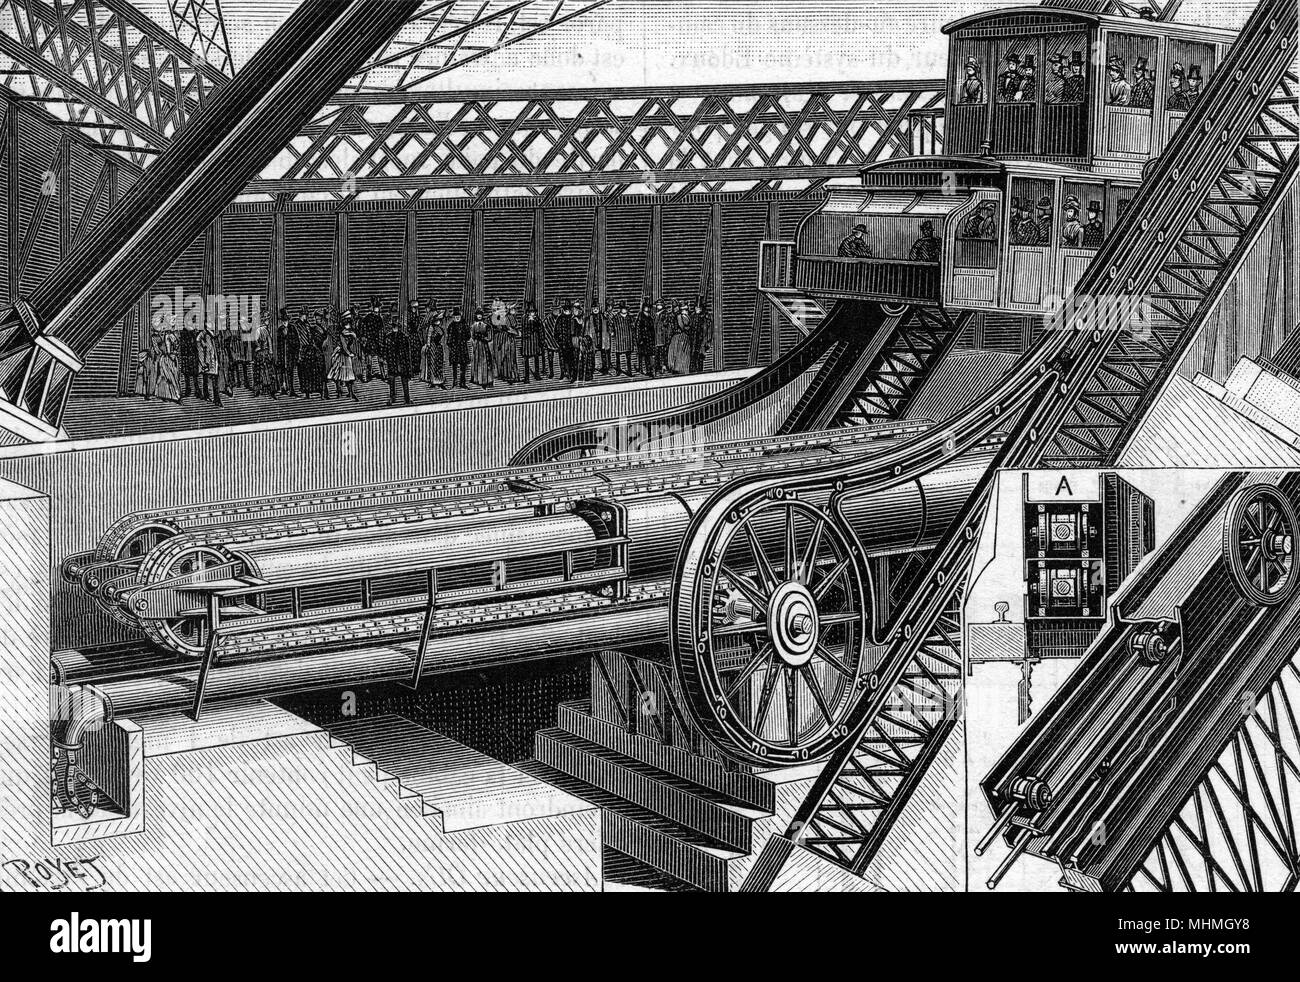 Mechanism of the Roux-Combluzier lift, showing pistons.       Date: 1889 Stock Photo